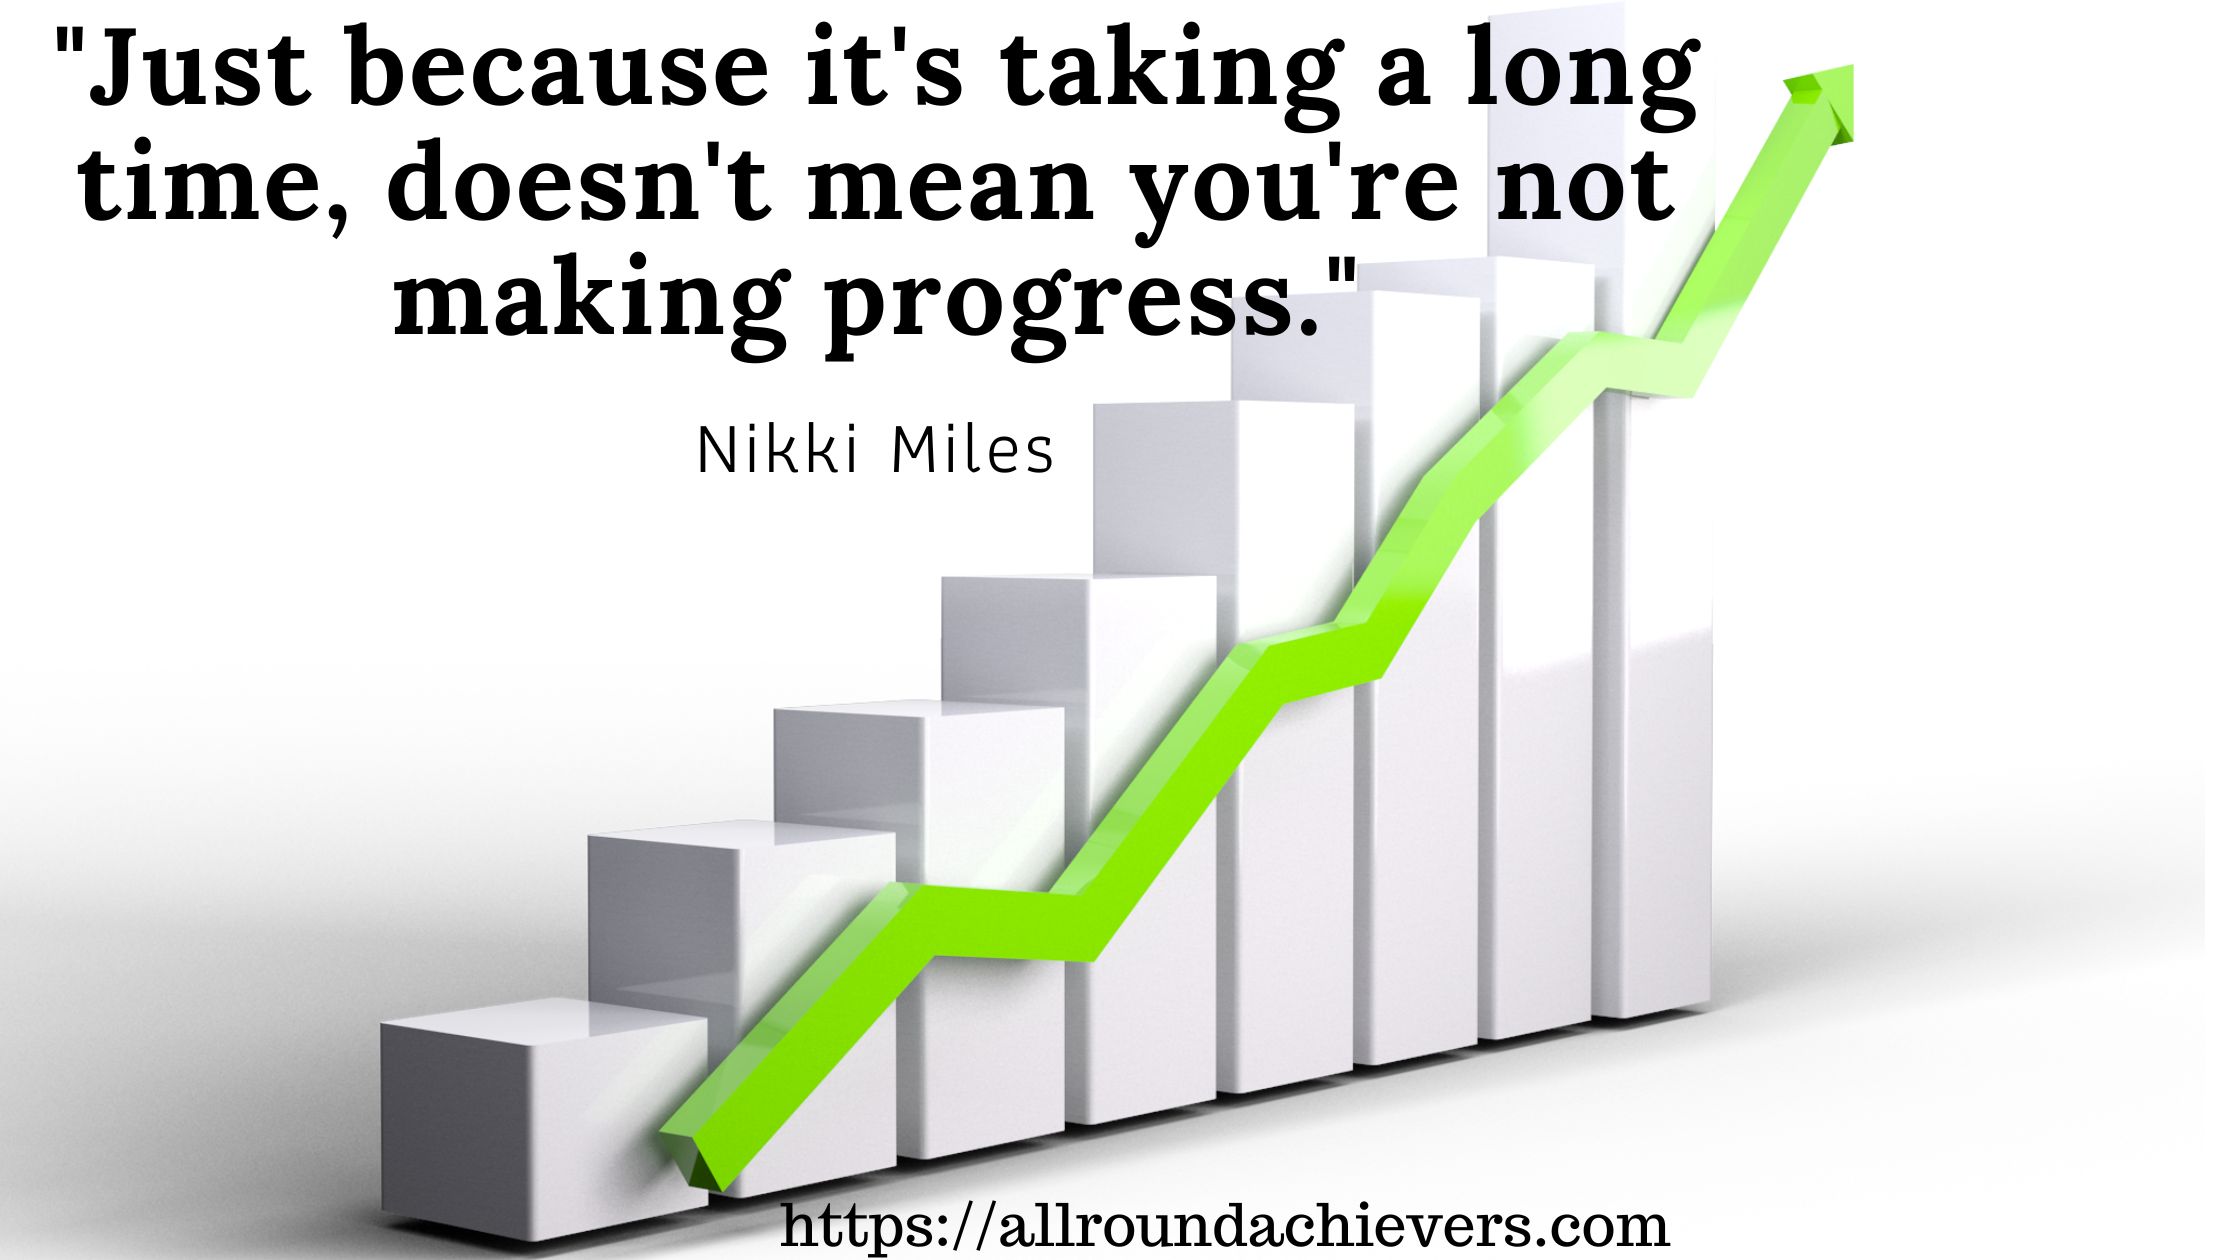 you are making progress